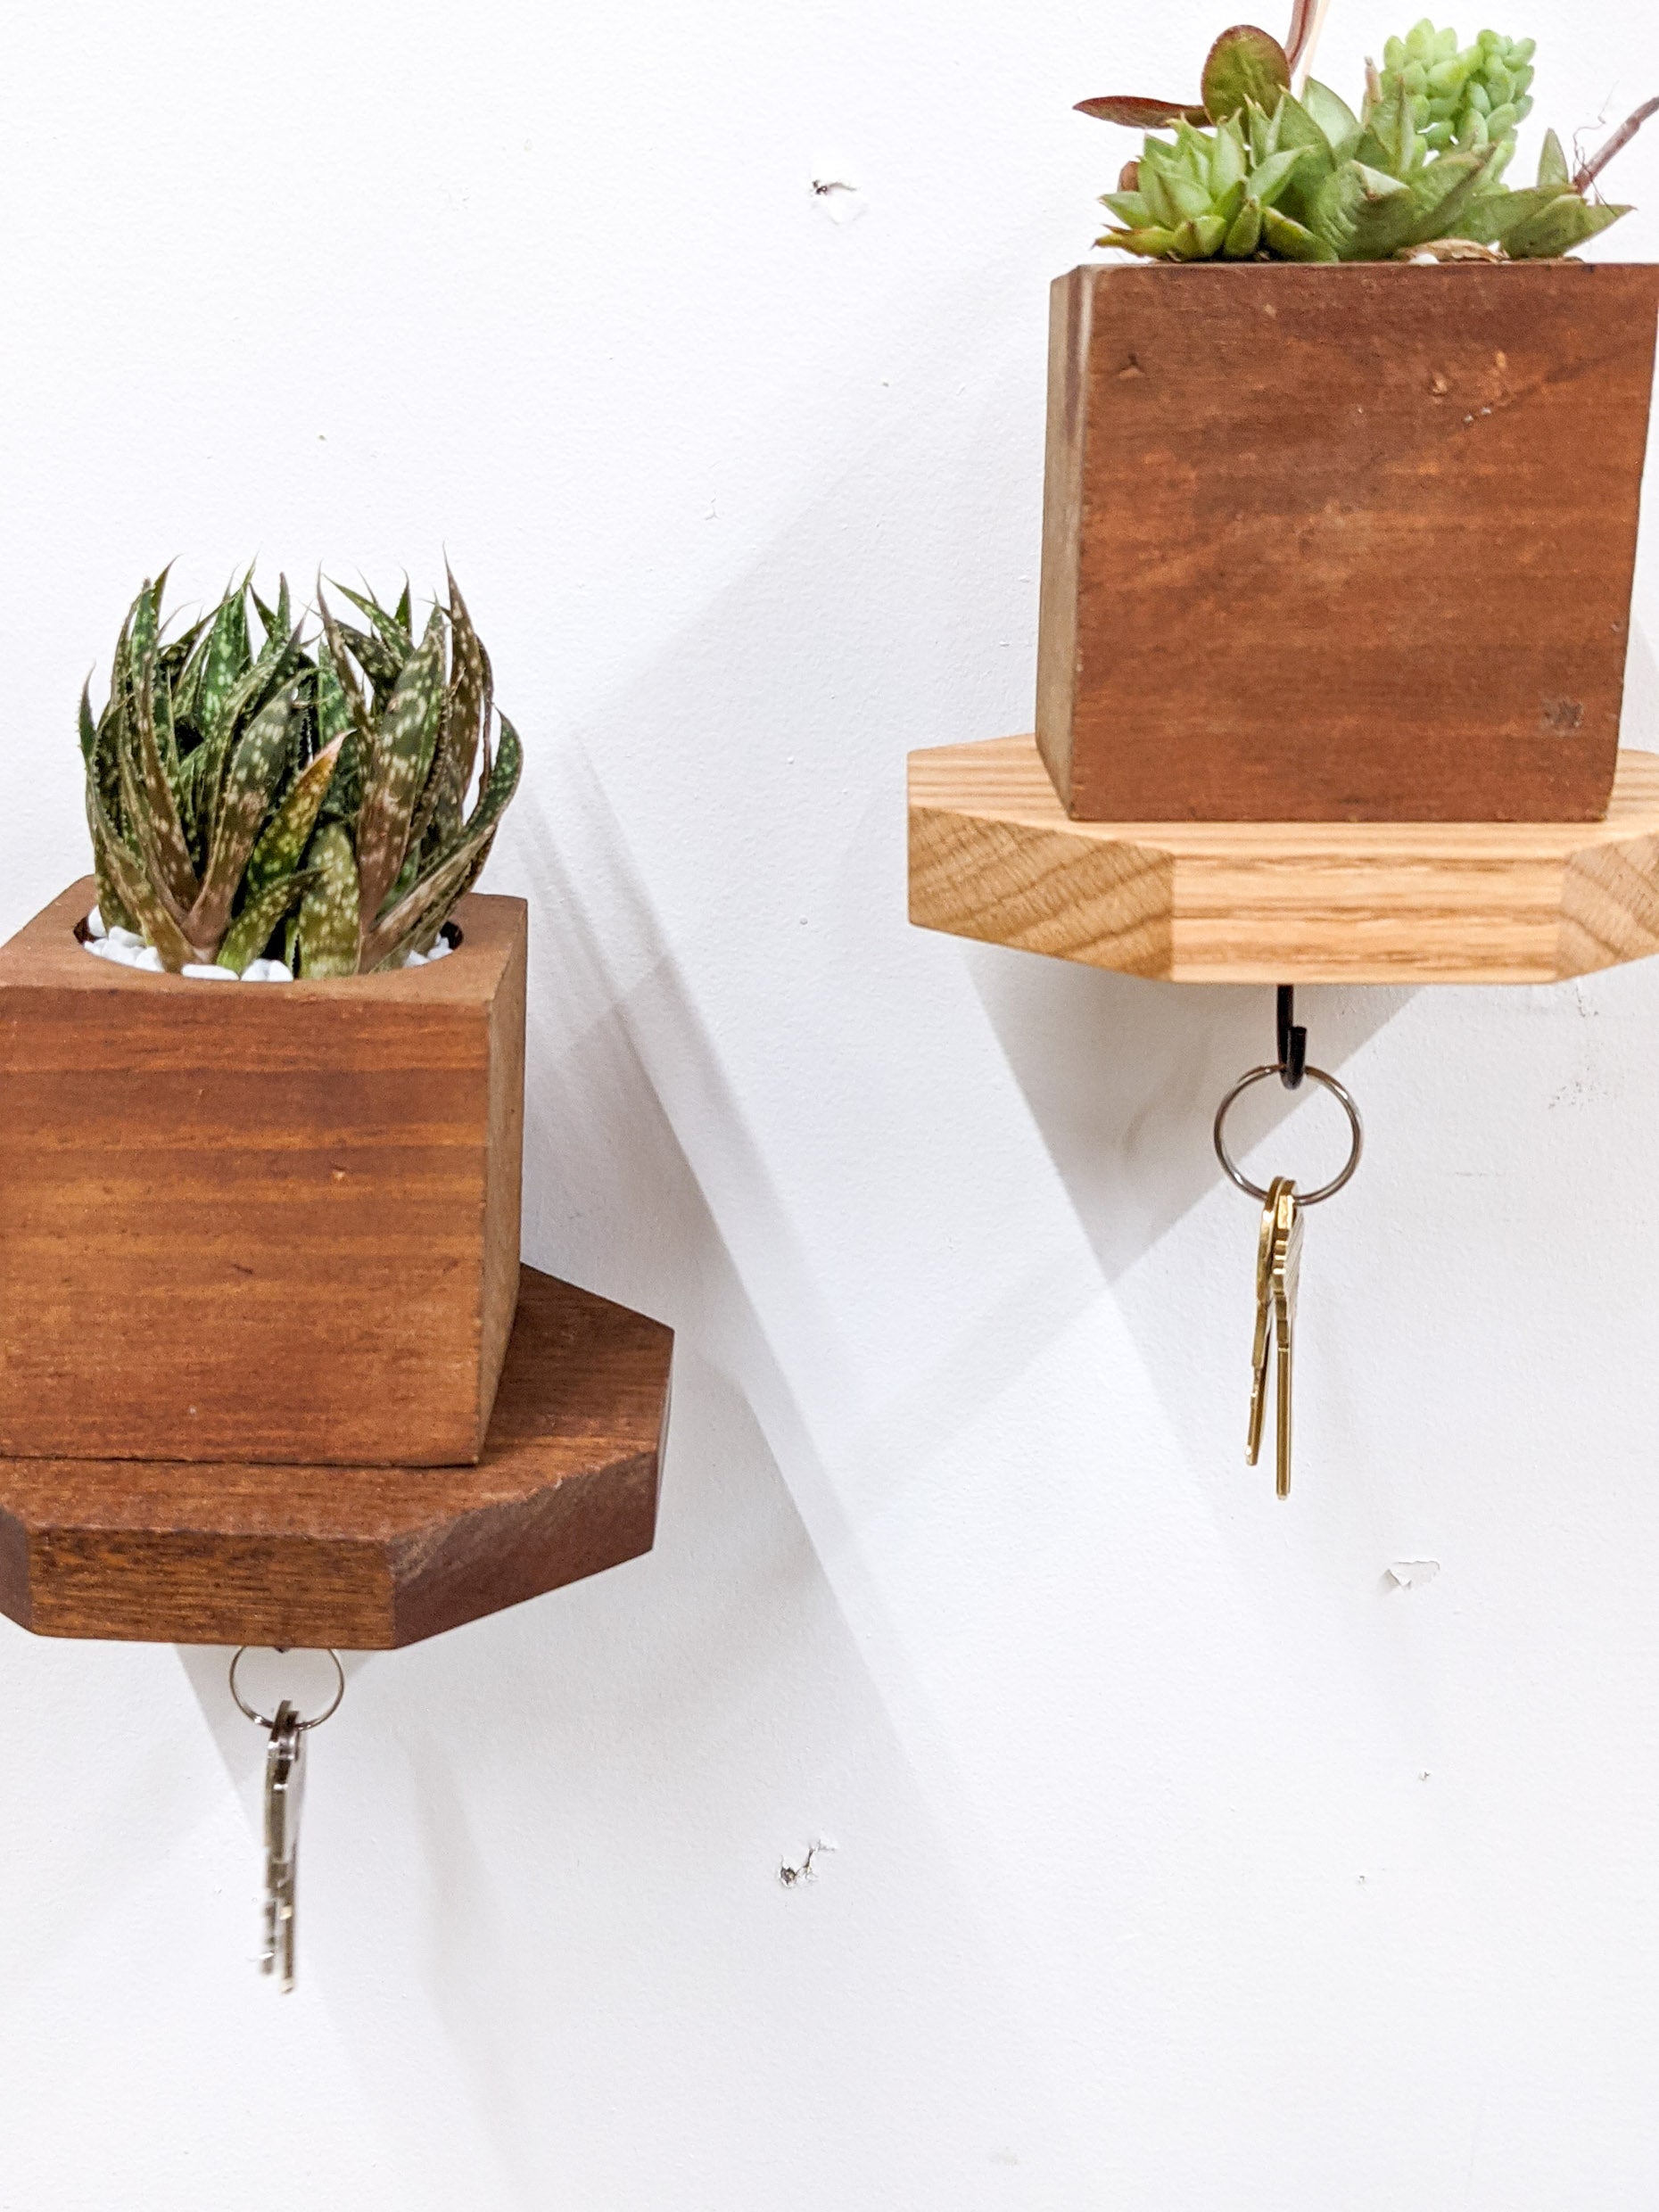 A set of oak and mahogany key shelves are successfully wall-mounted. To the left, a mahogany octagon key shelf holds a square mahogany planter filled with succulents. A set of bronze keys dangle from a black key hook at the bottom. Above and to the right of it, a wall mounted oak octagon key shelf holds a mahogany square planter with succulents and a pair of keys. 